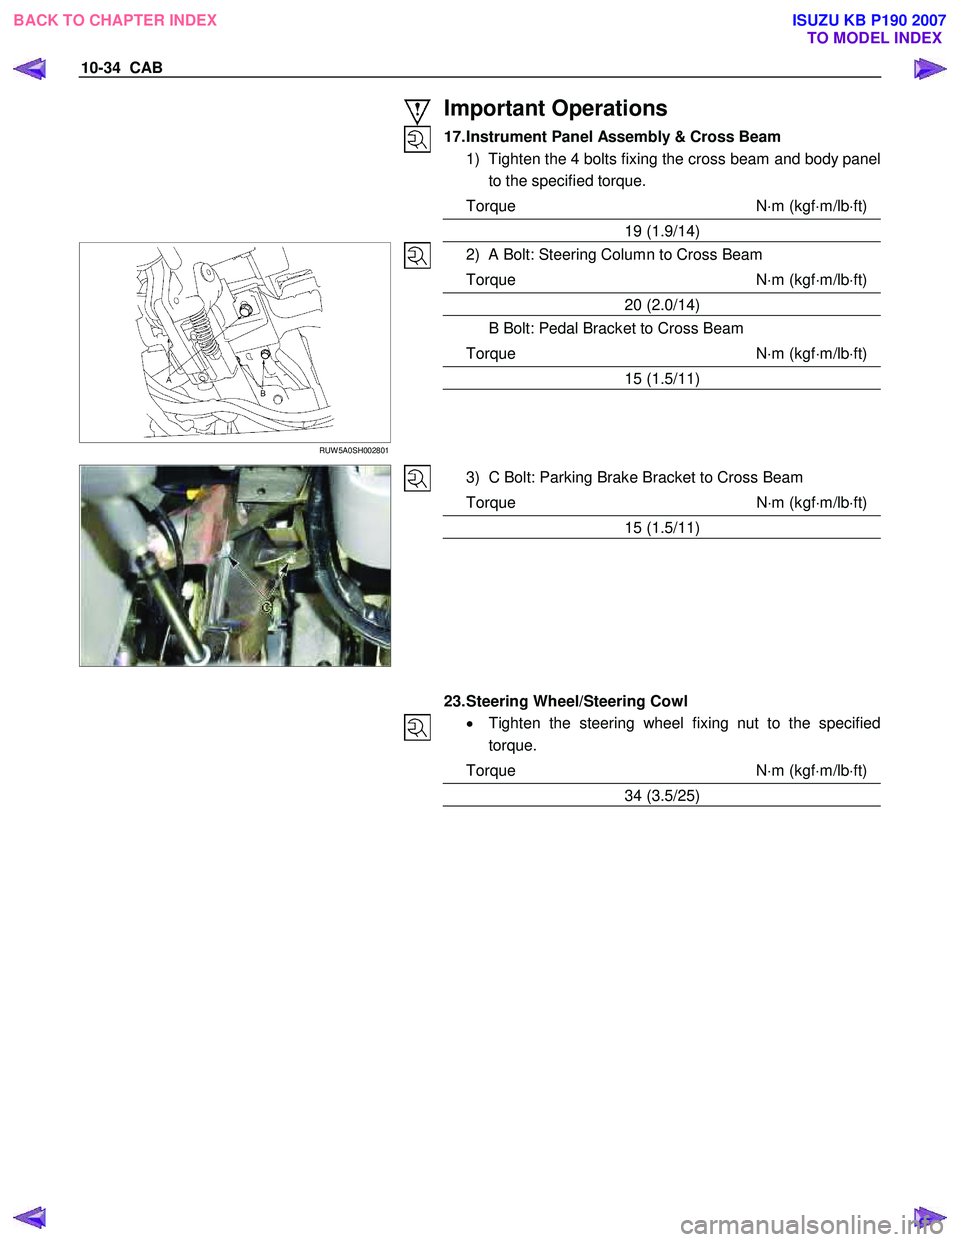 ISUZU KB P190 2007  Workshop Manual PDF 10-34  CAB 
 Important Operations 
17. Instrument Panel Assembly & Cross Beam 1)  Tighten the 4 bolts fixing the cross beam and body panel to the specified torque. 
Torque N ⋅m (kgf ⋅m/lb ⋅ft)
1